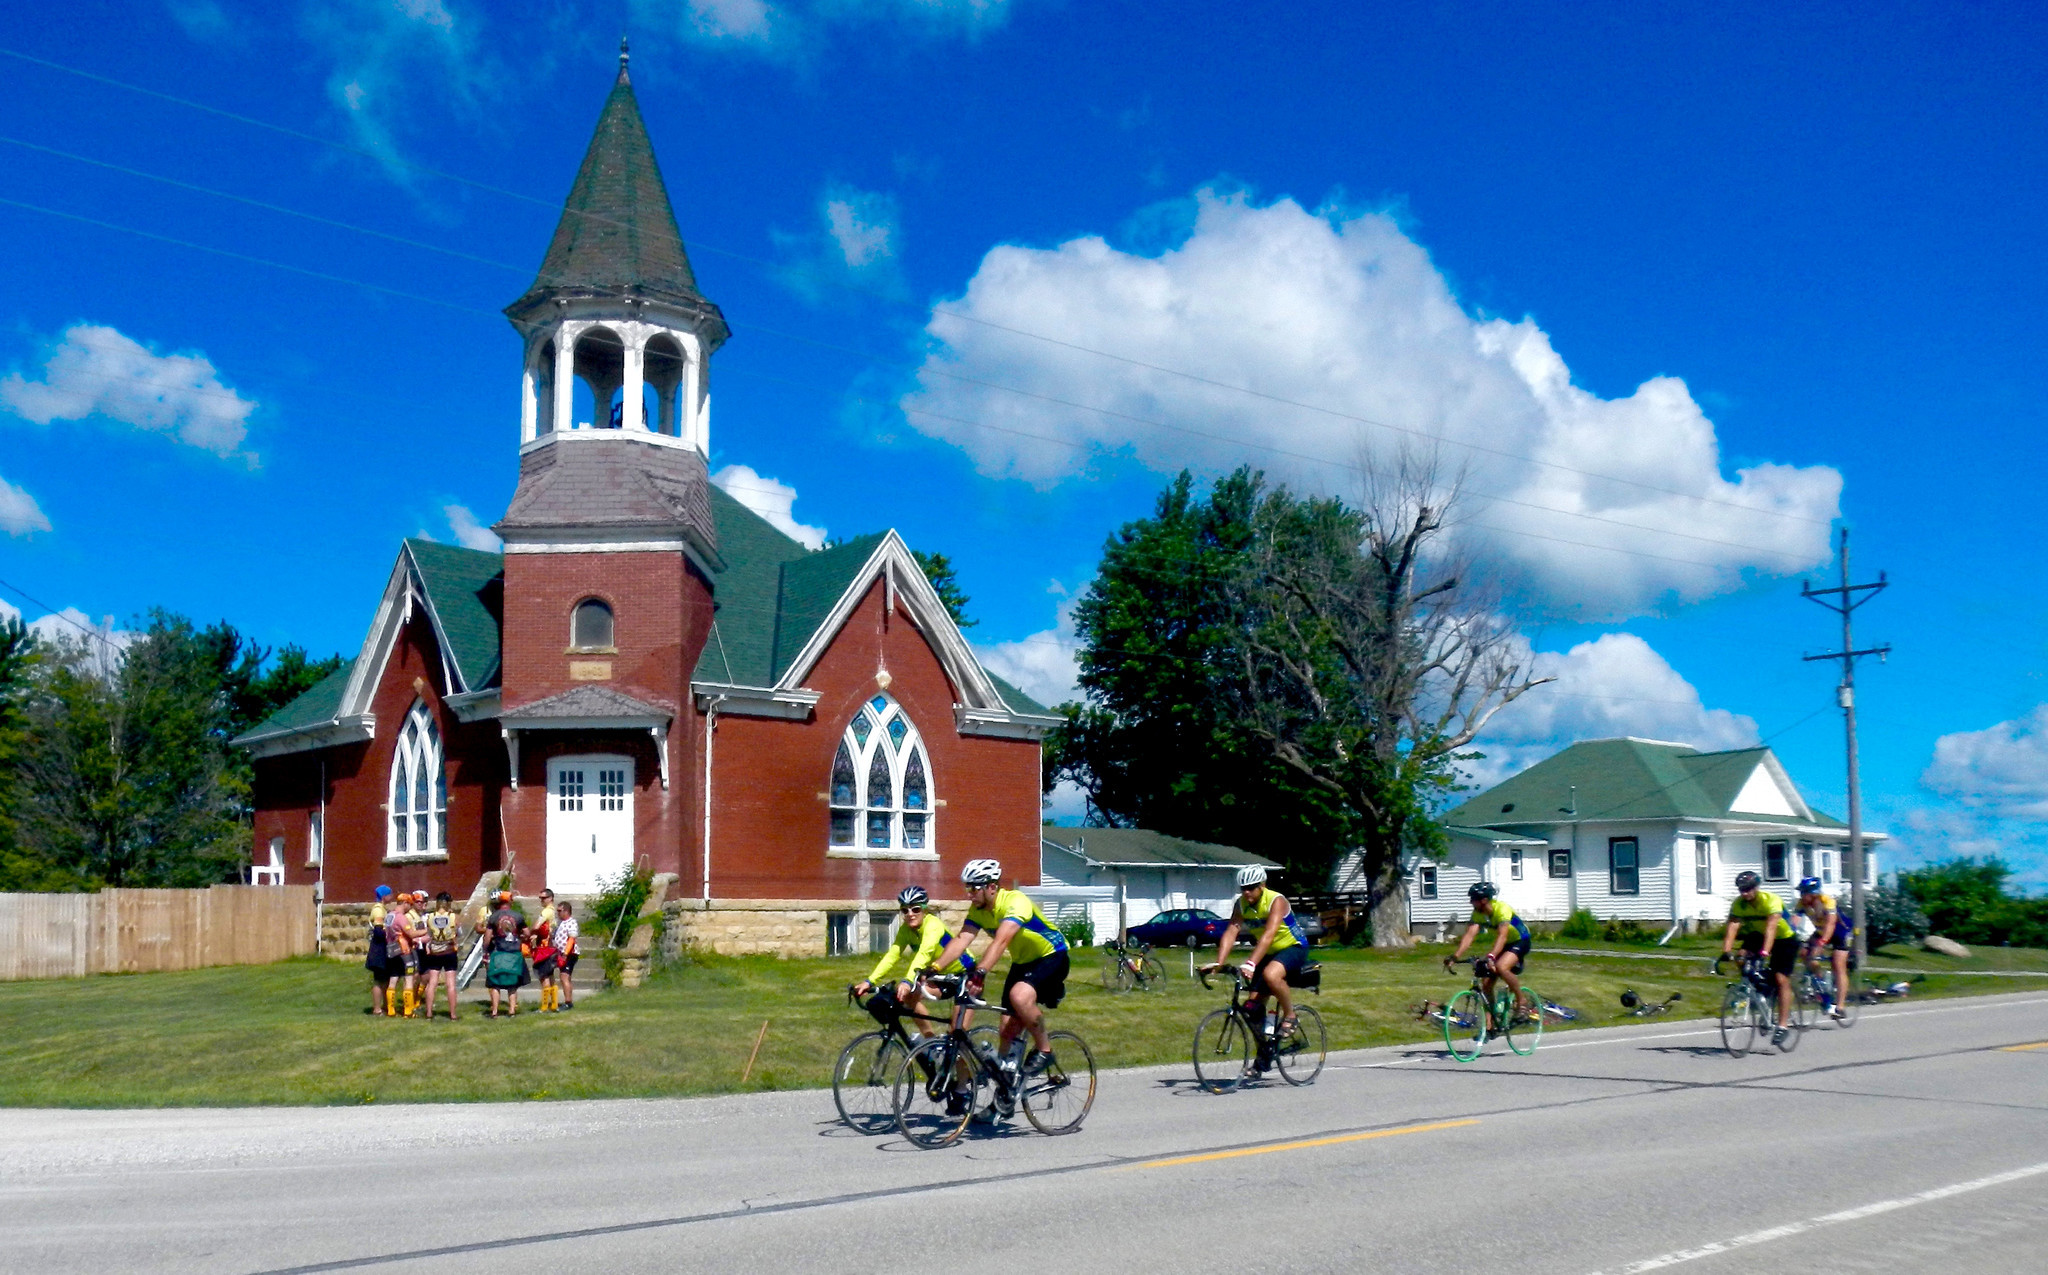 Cyclists on an Iowa RAGBRAI tour riding by a church in a small town in eastern Iowa. Some of the riders have stopped to check out the church.